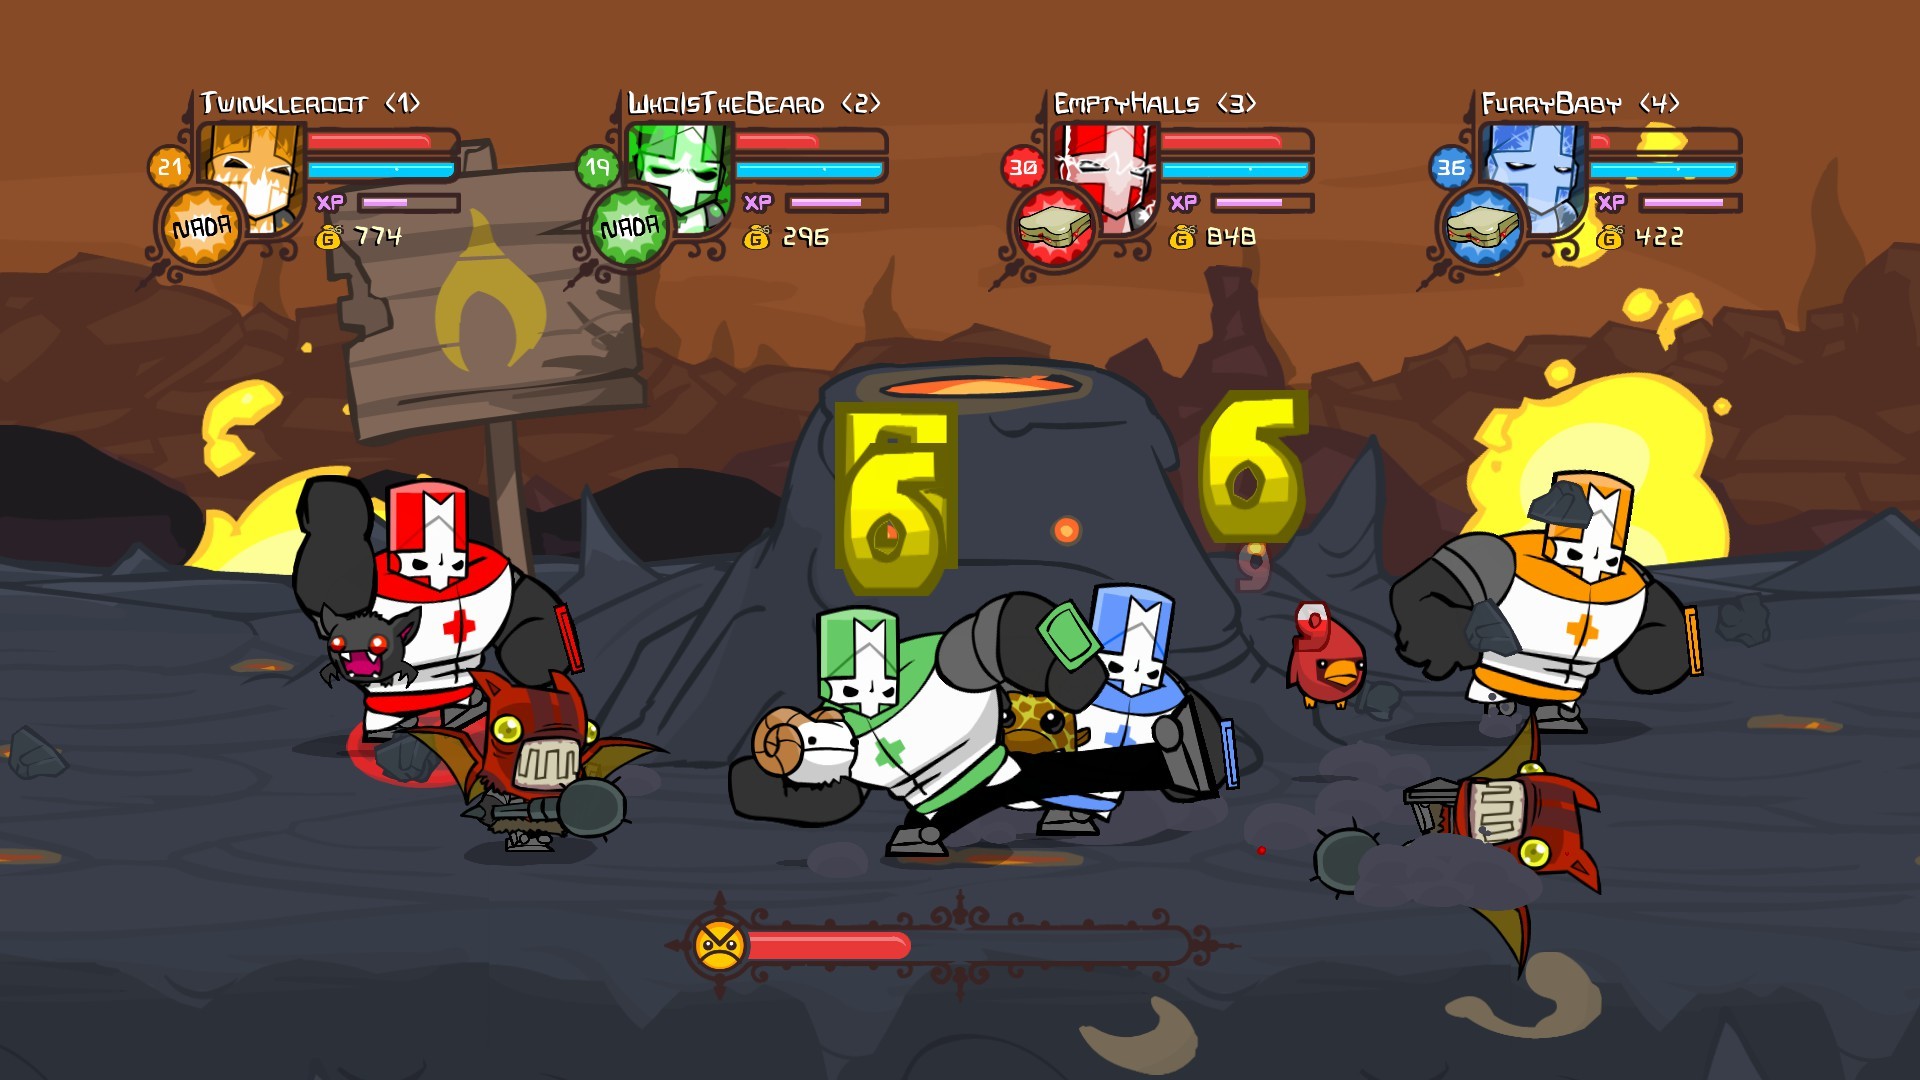 Castle Crashers - Online Game of the Week